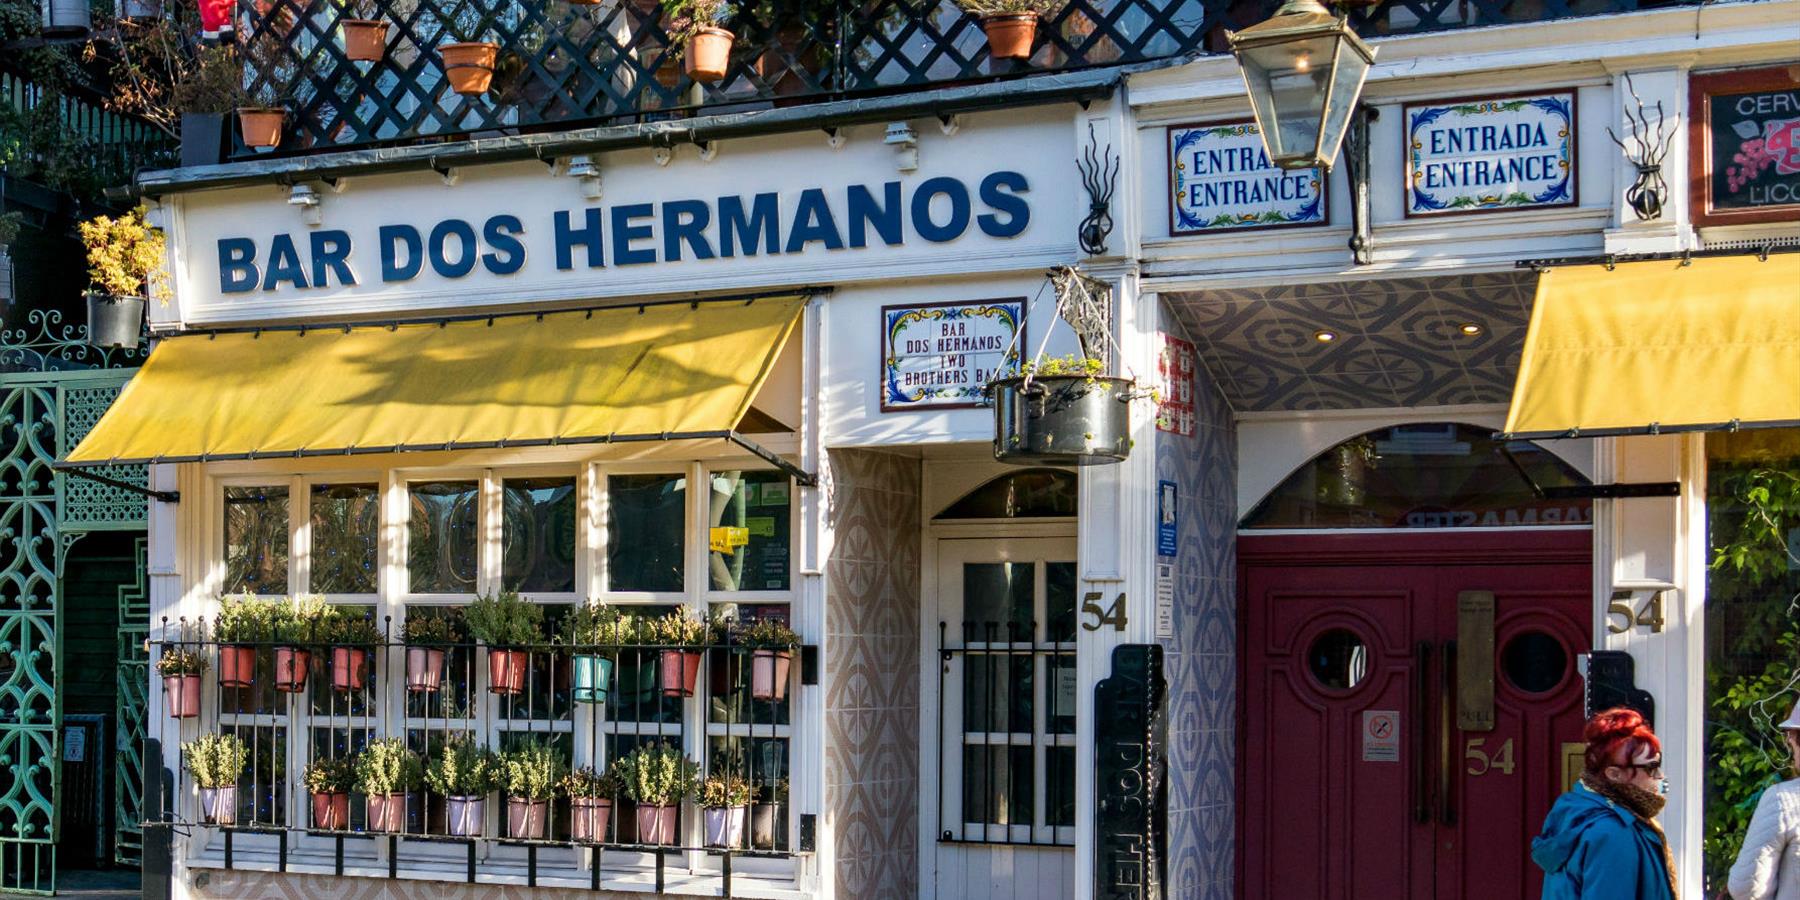 Bar Dos Hermanos, Bars - Eating and Drinking in Leicester